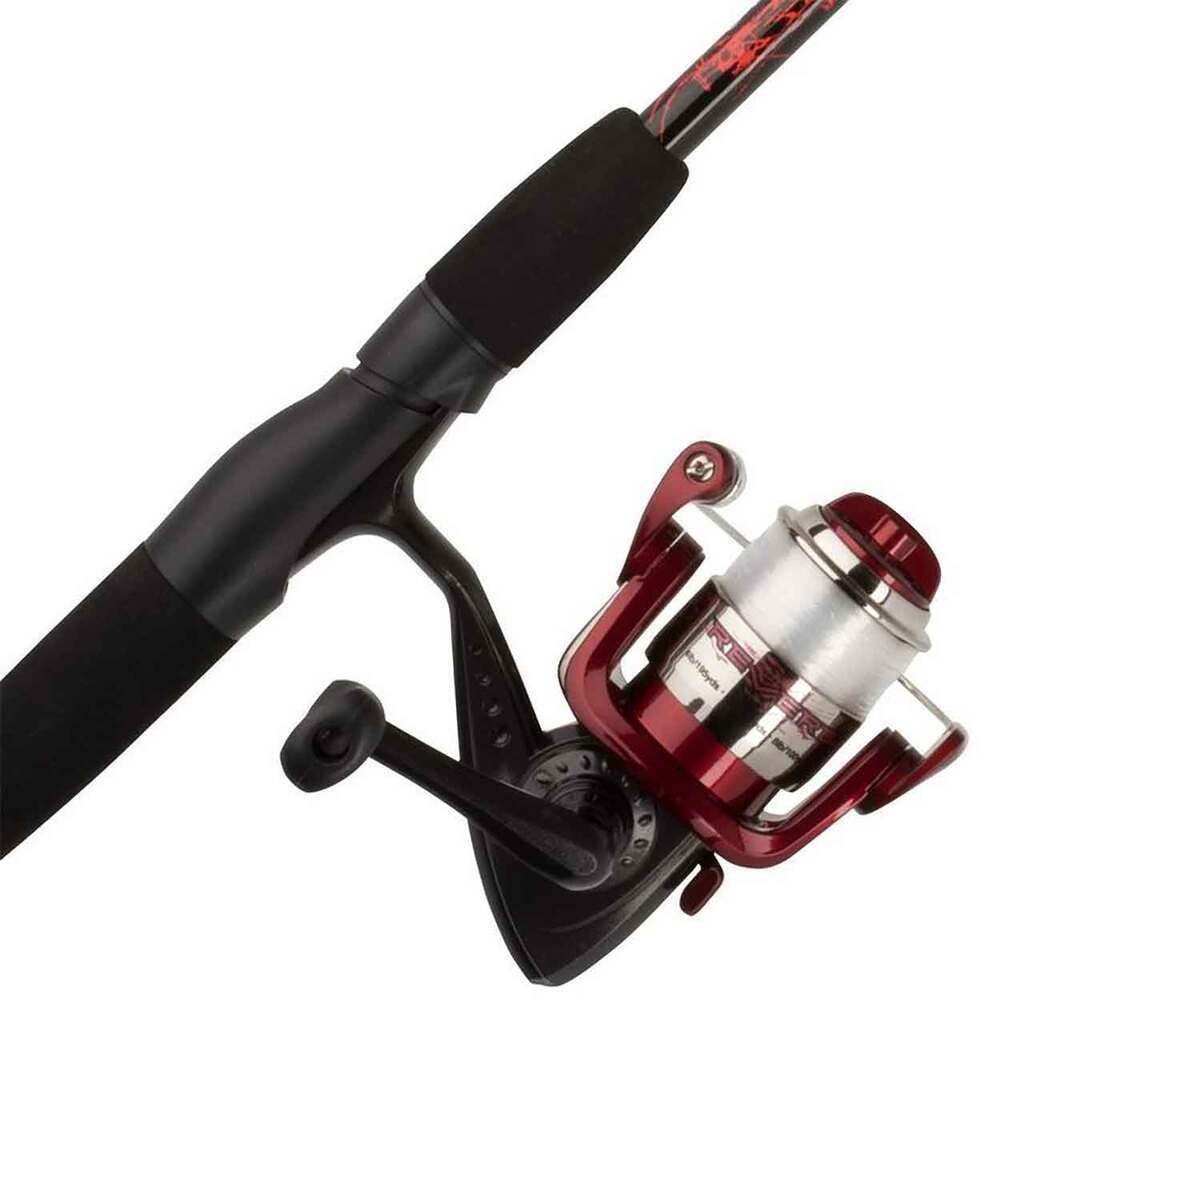 Review – Shakespeare Fishing Rods